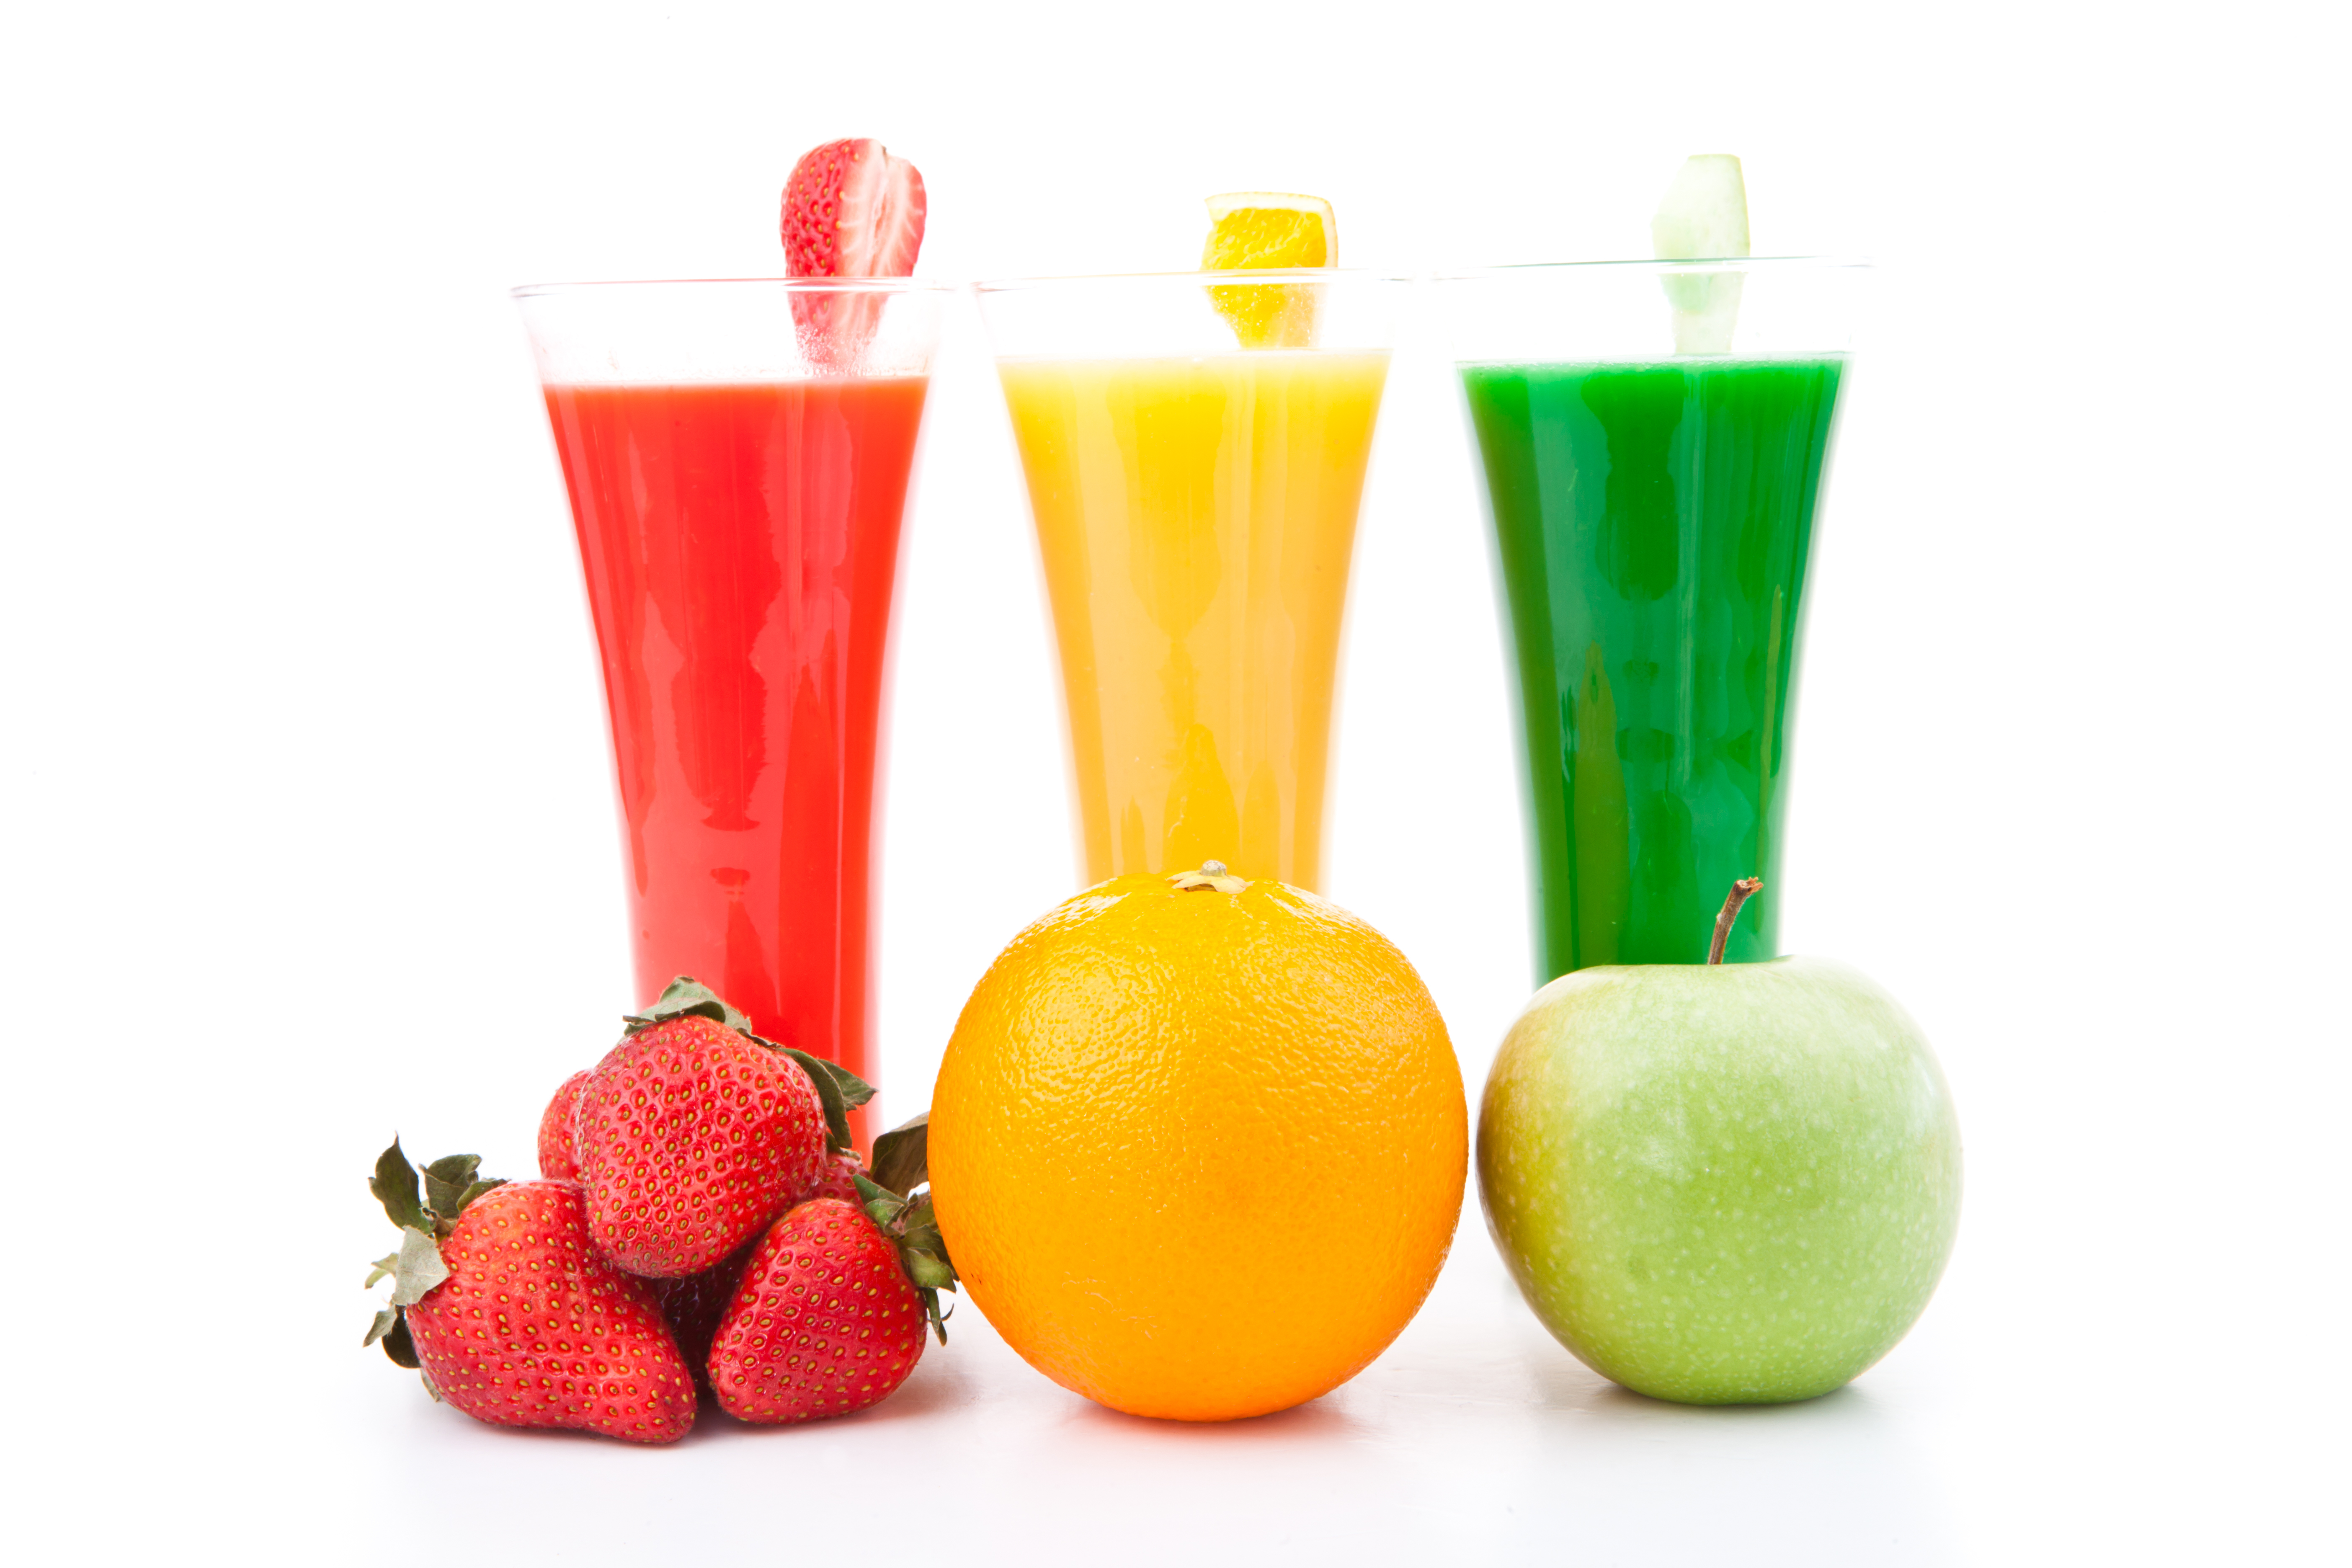 fruits placed in front of full glasses against white background